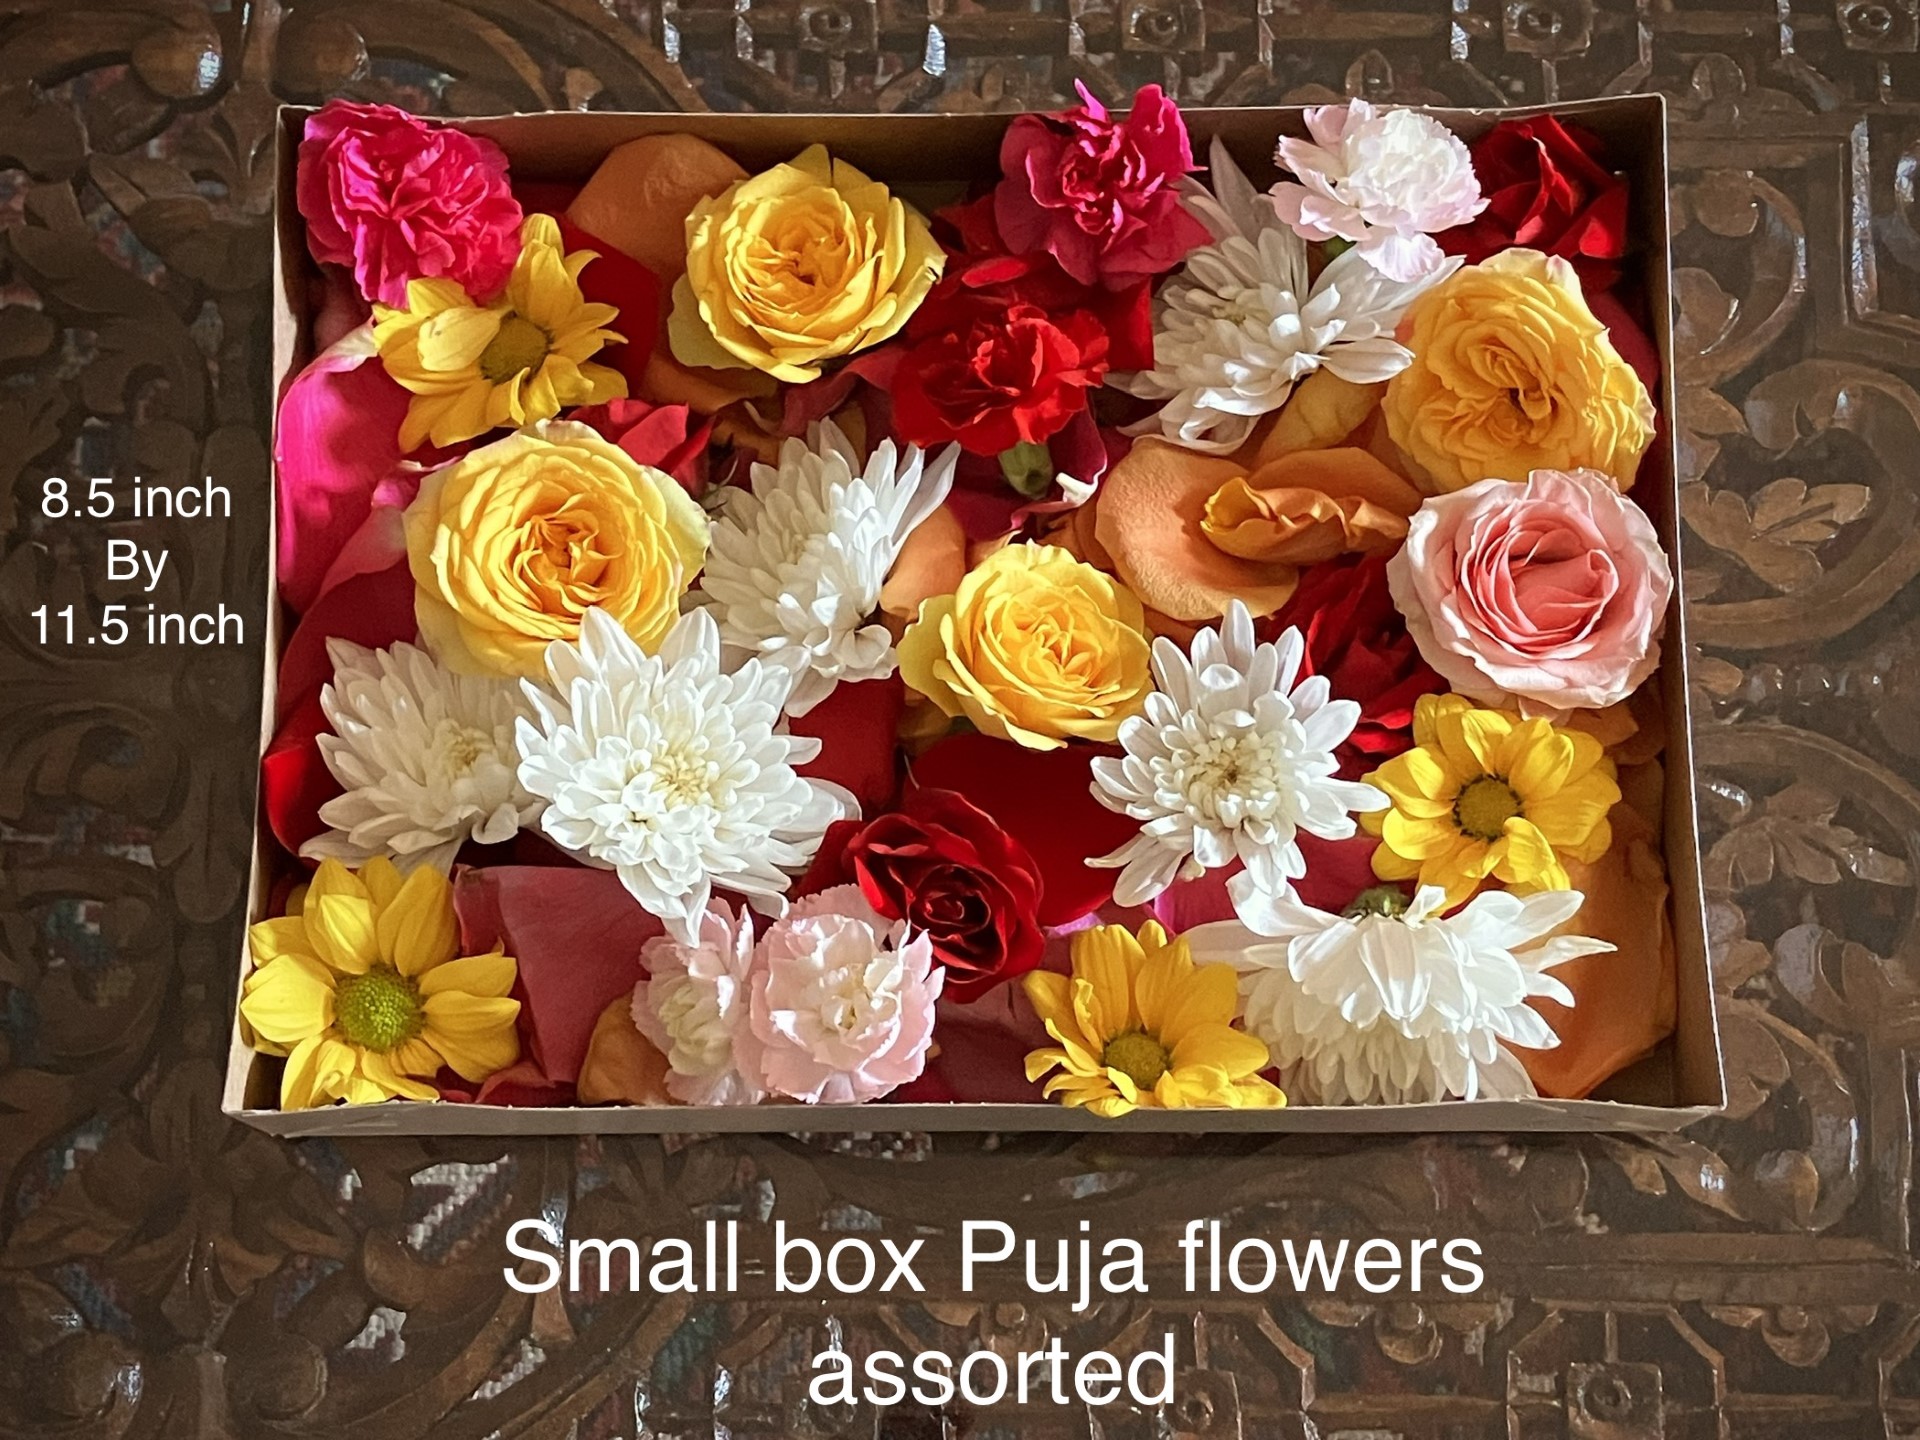 $10 Puja flowers assorted loose